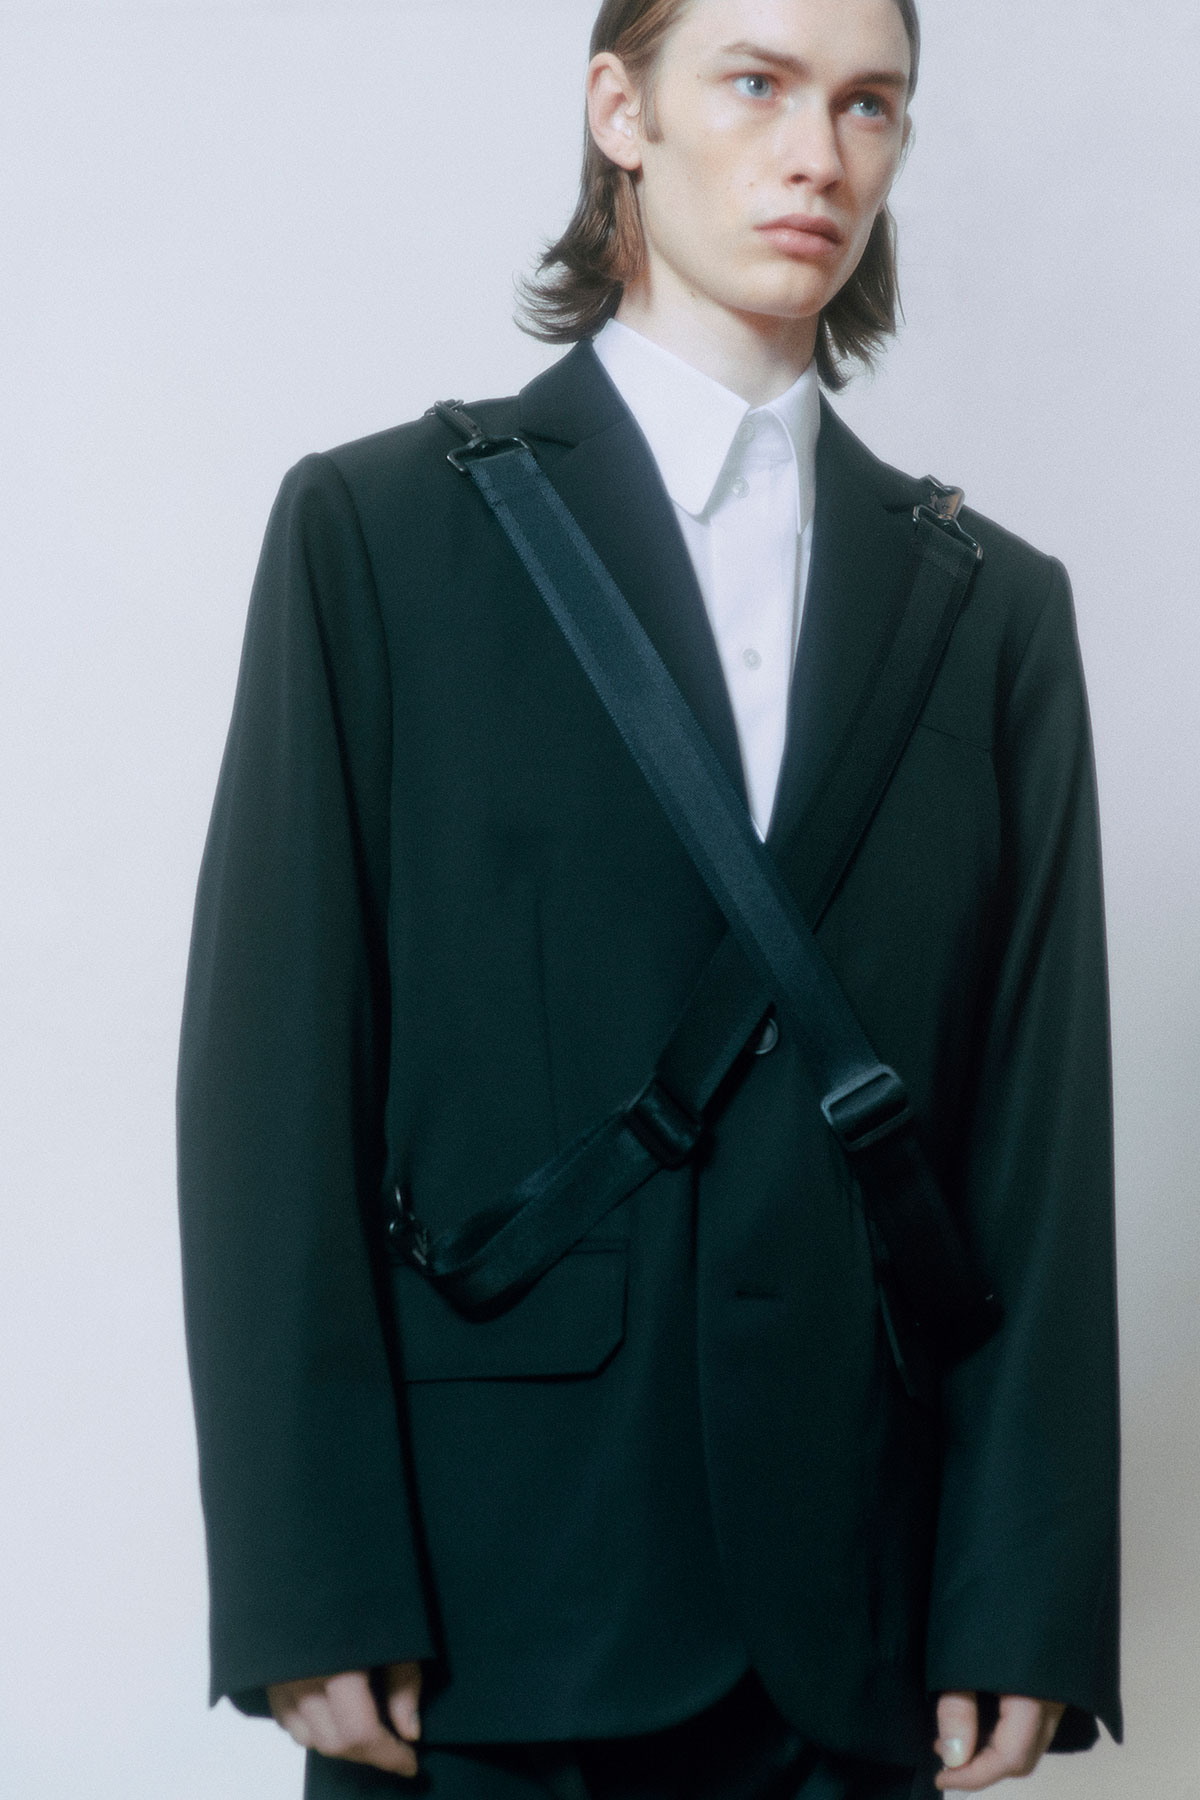 Helmut Lang Fall Winter 2022 Collection | The Fashionography